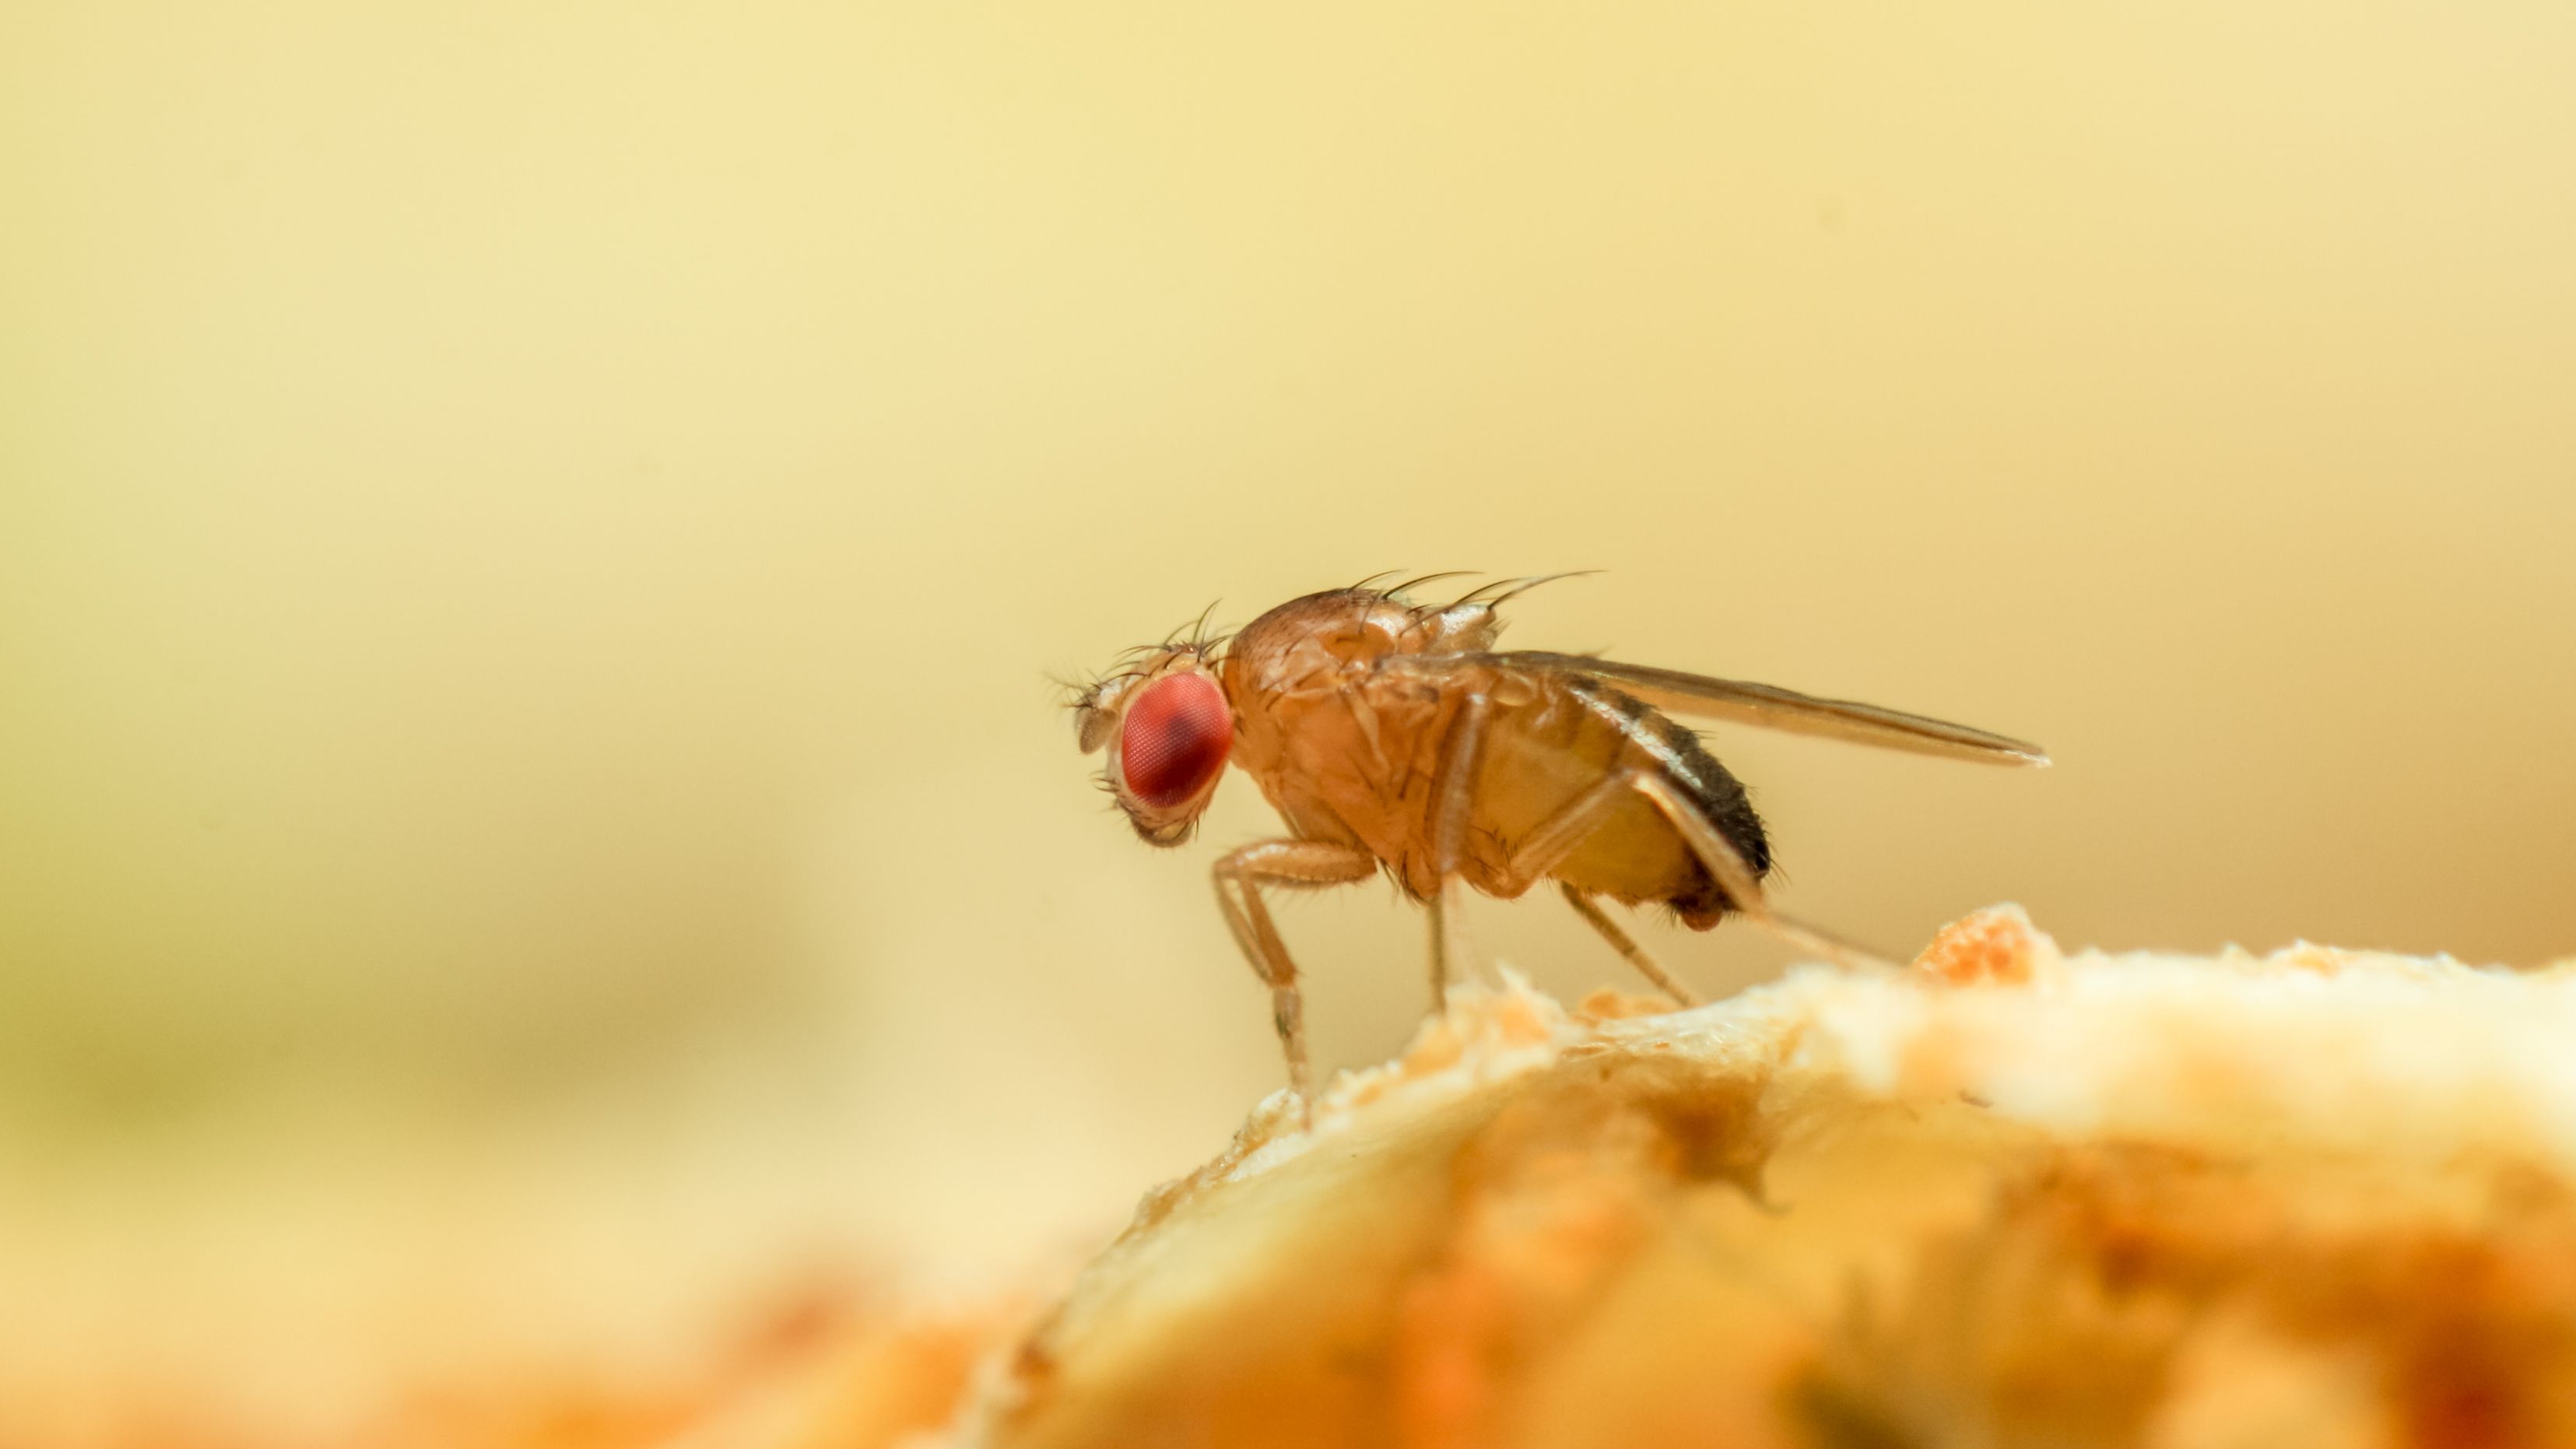 How to Get Rid of Gnats - Get Rid of Fruit Flies